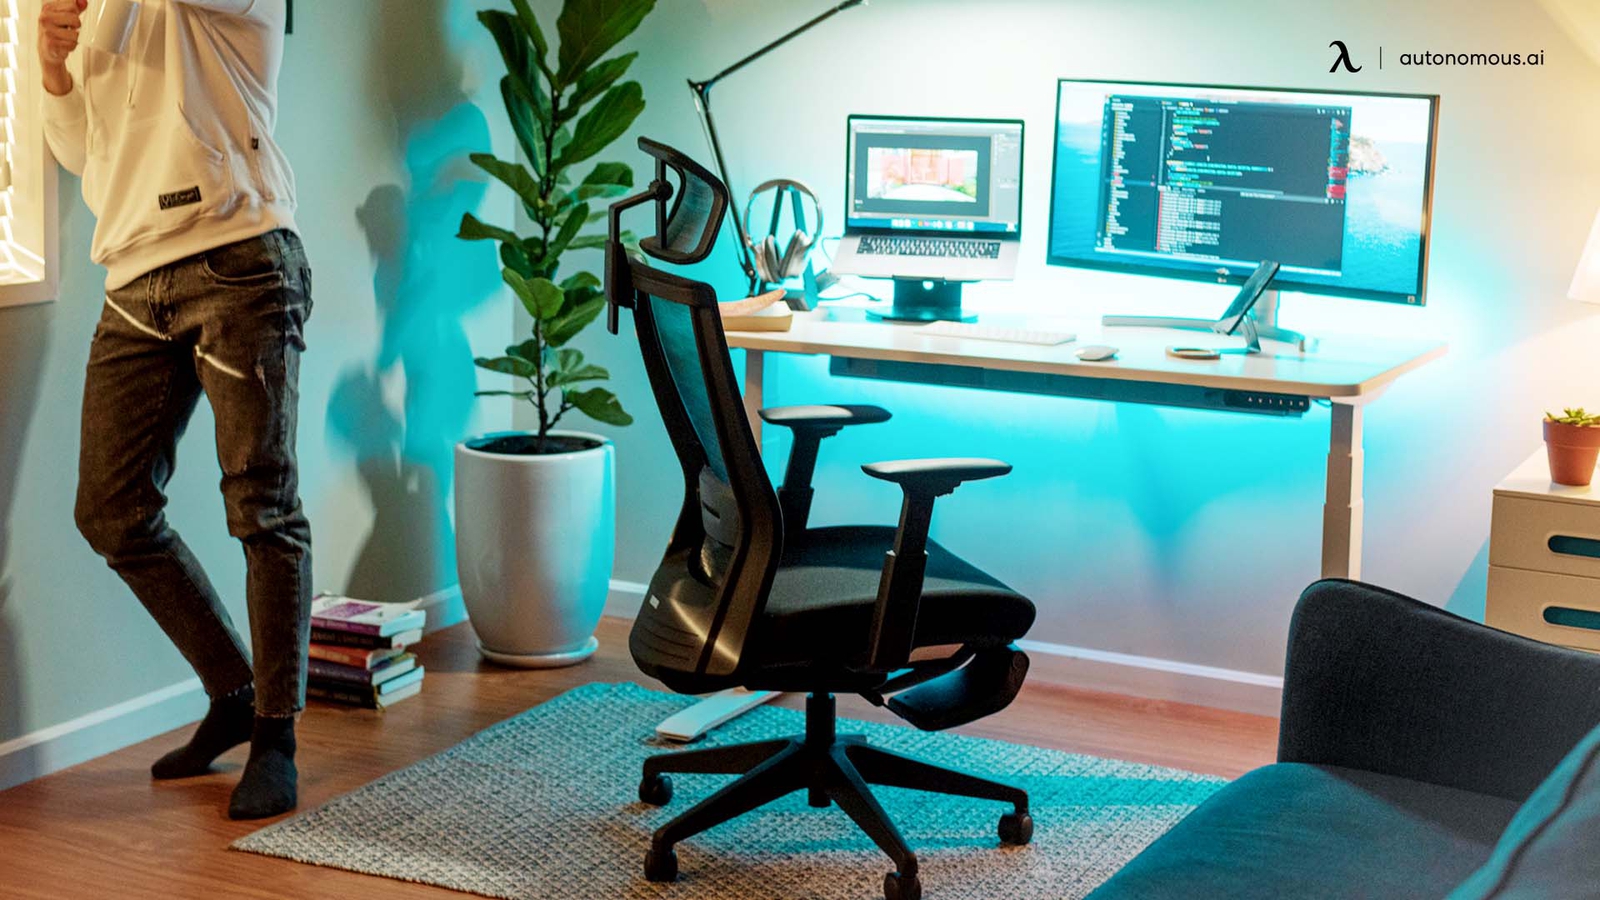 5 Useful Tips for an Ergonomic Laptop Setup in 2023